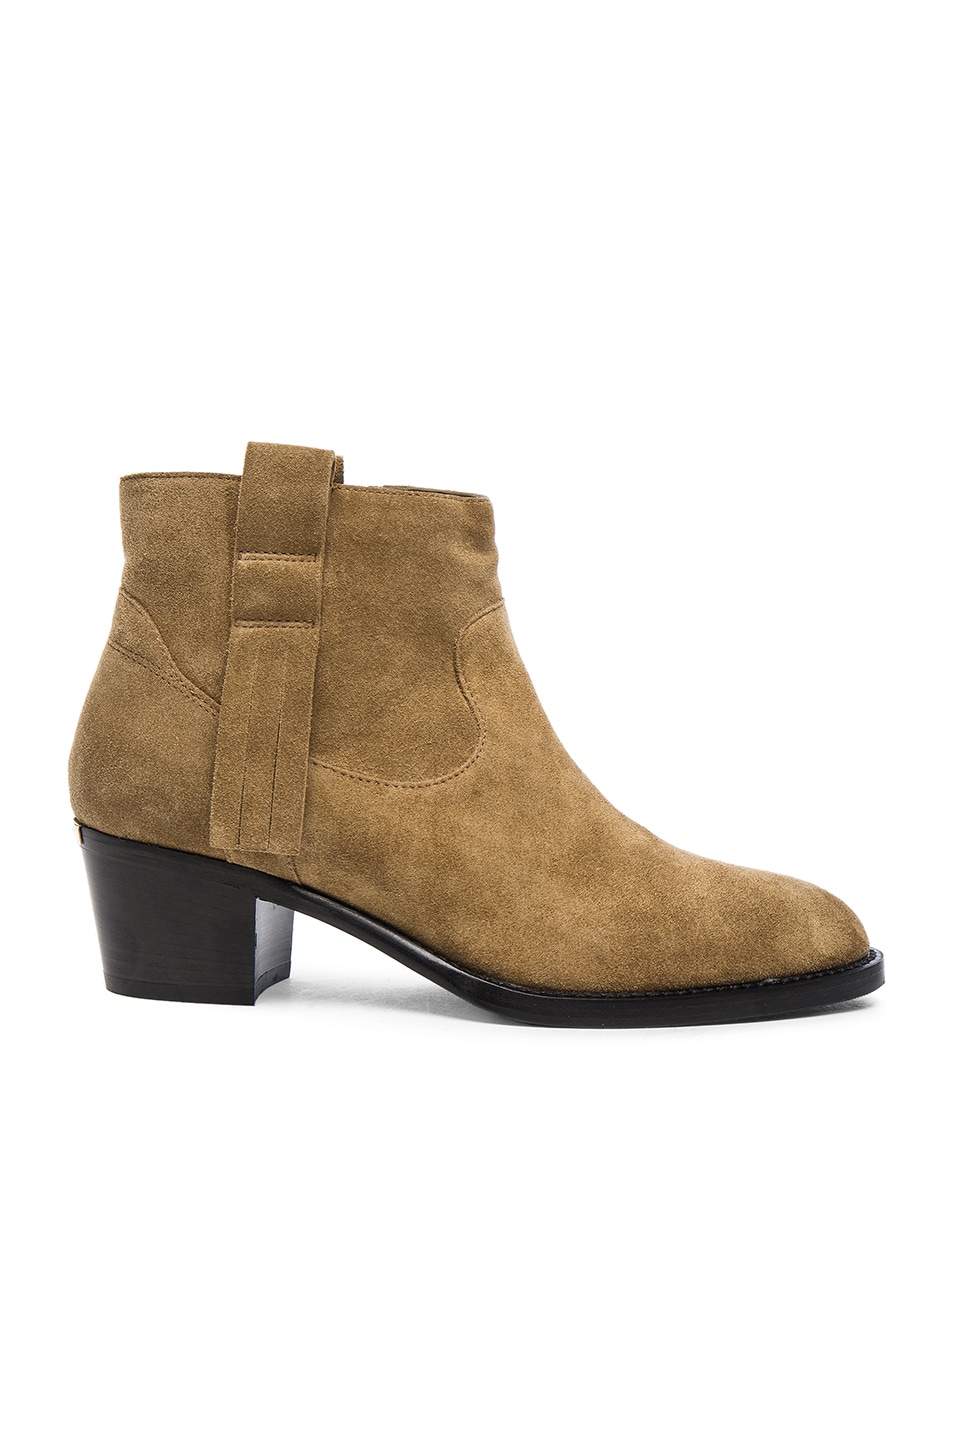 Image 1 of Burberry London Coletta Suede Ankle Boots in Sandstone